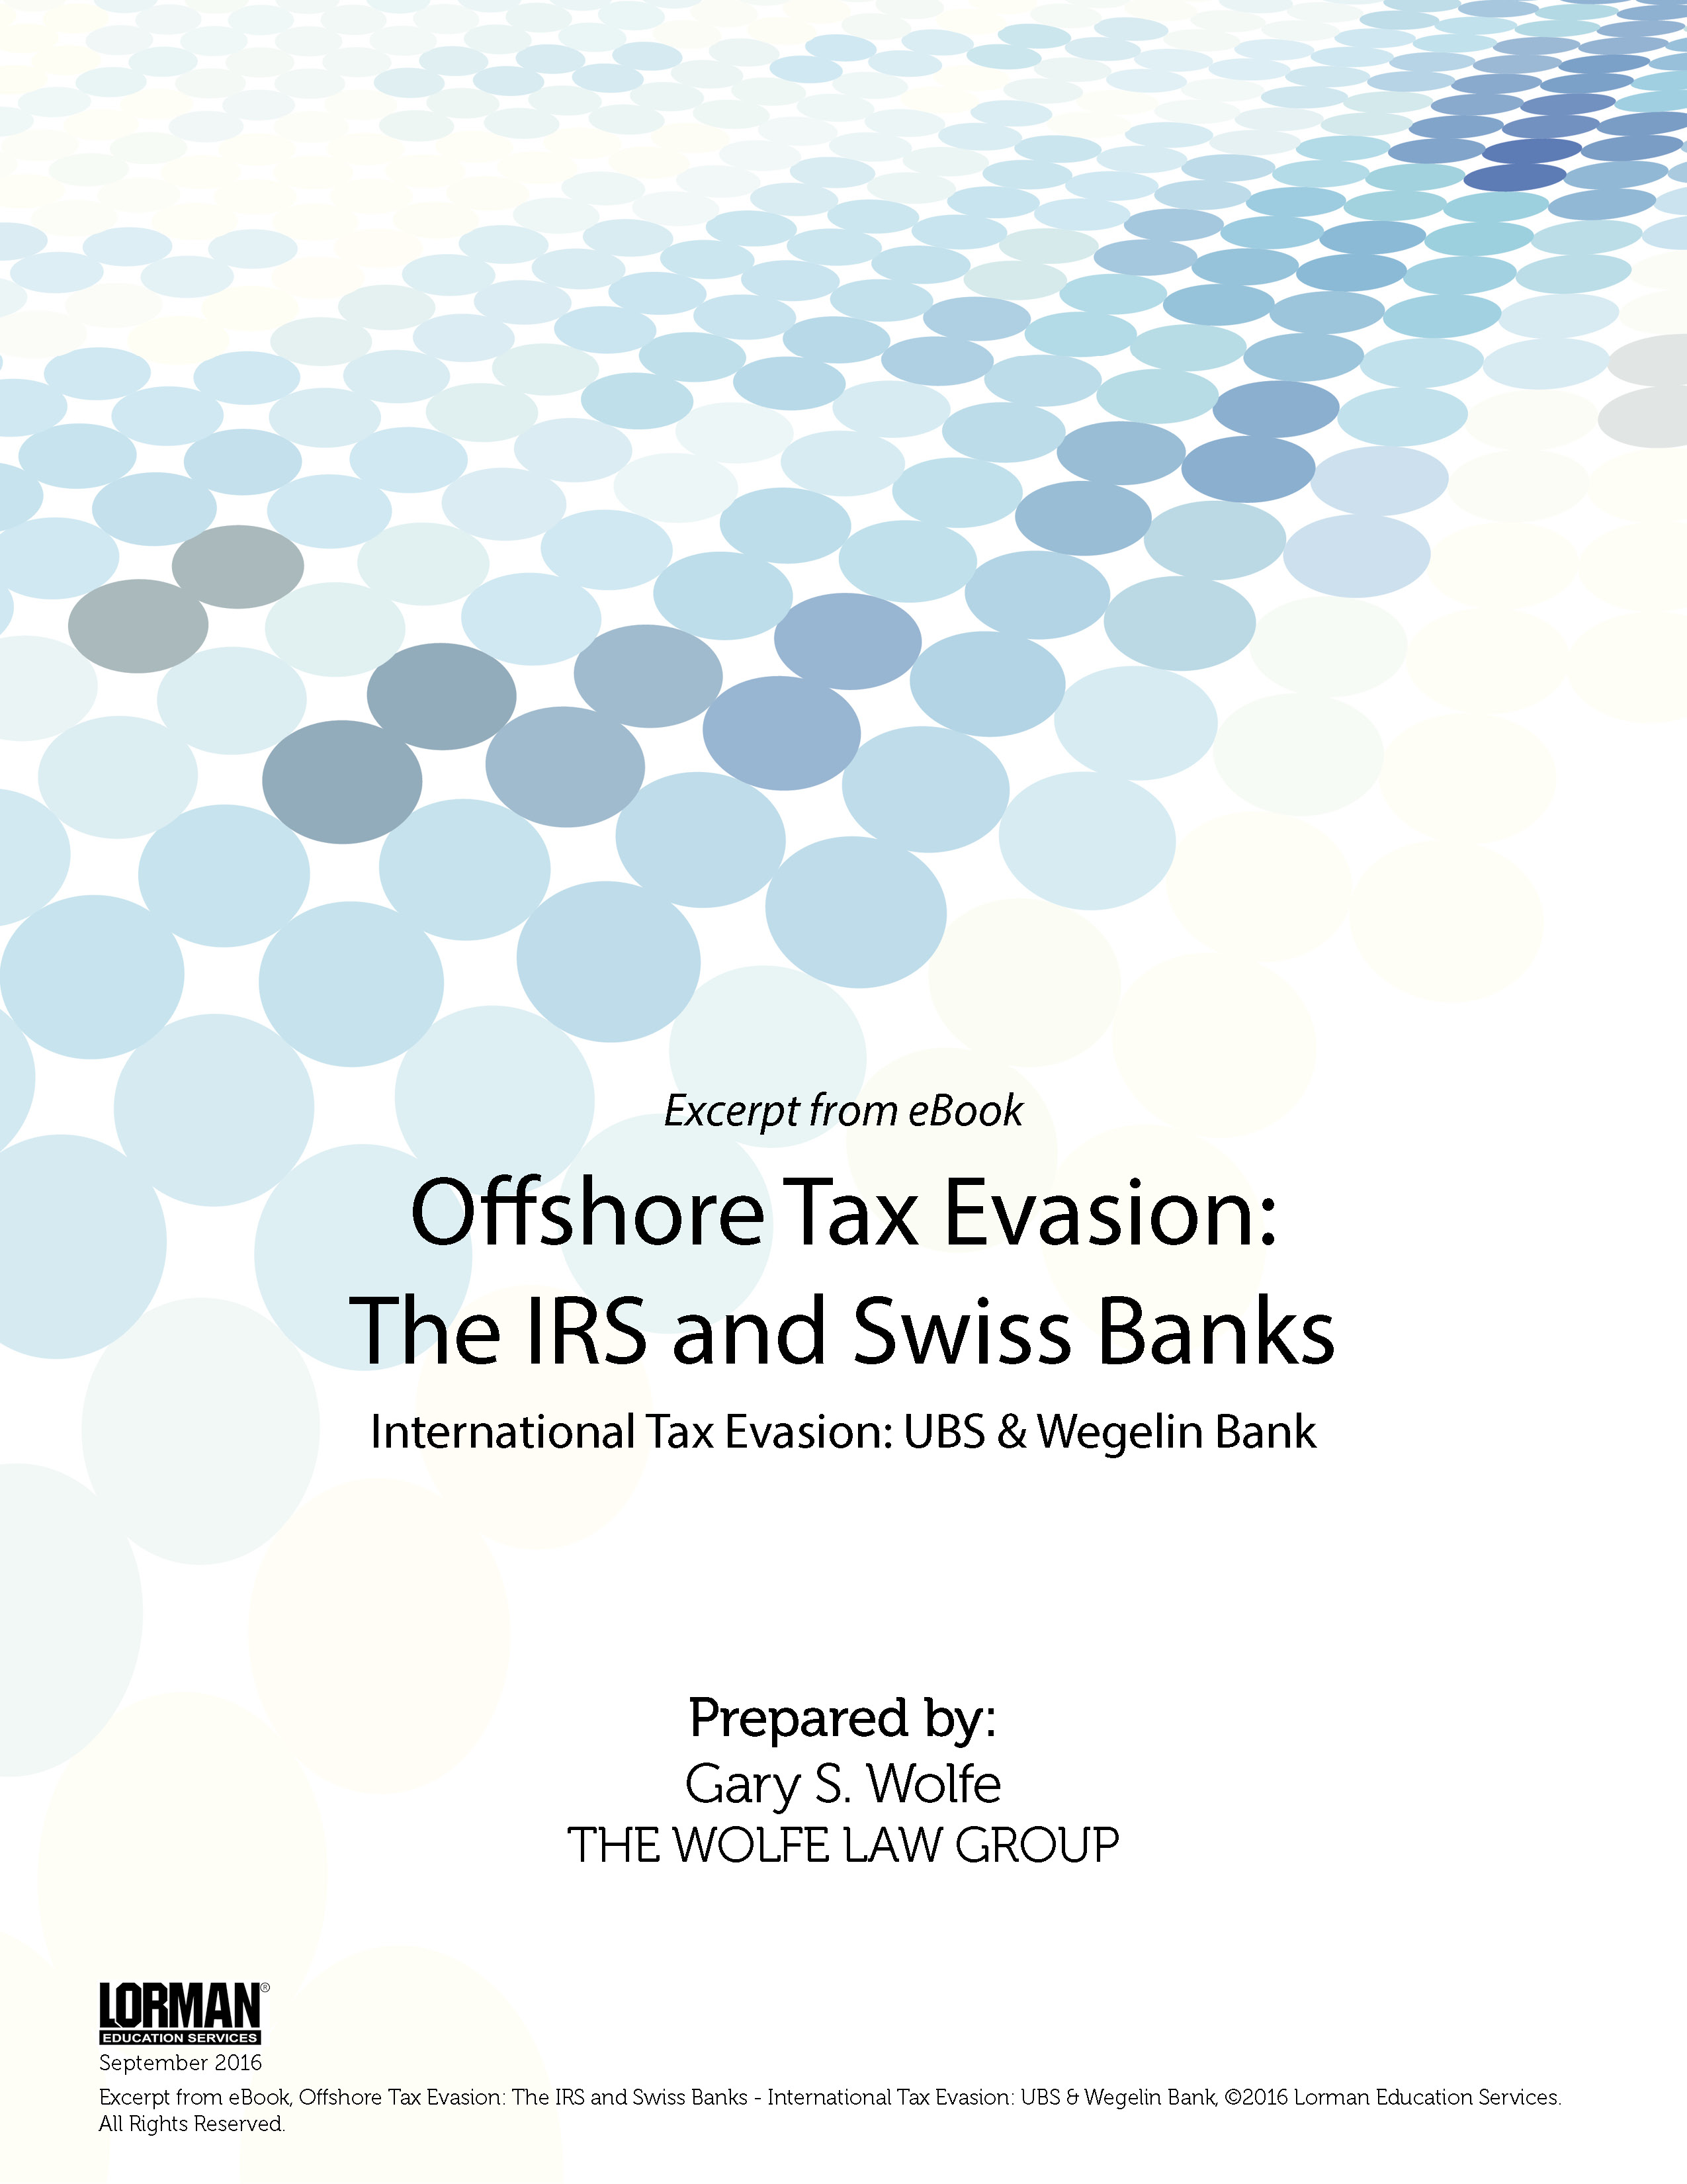 Offshore Tax Evasion: The IRS and Swiss Banks - International Tax Evasion: UBS & Wegelin Bank